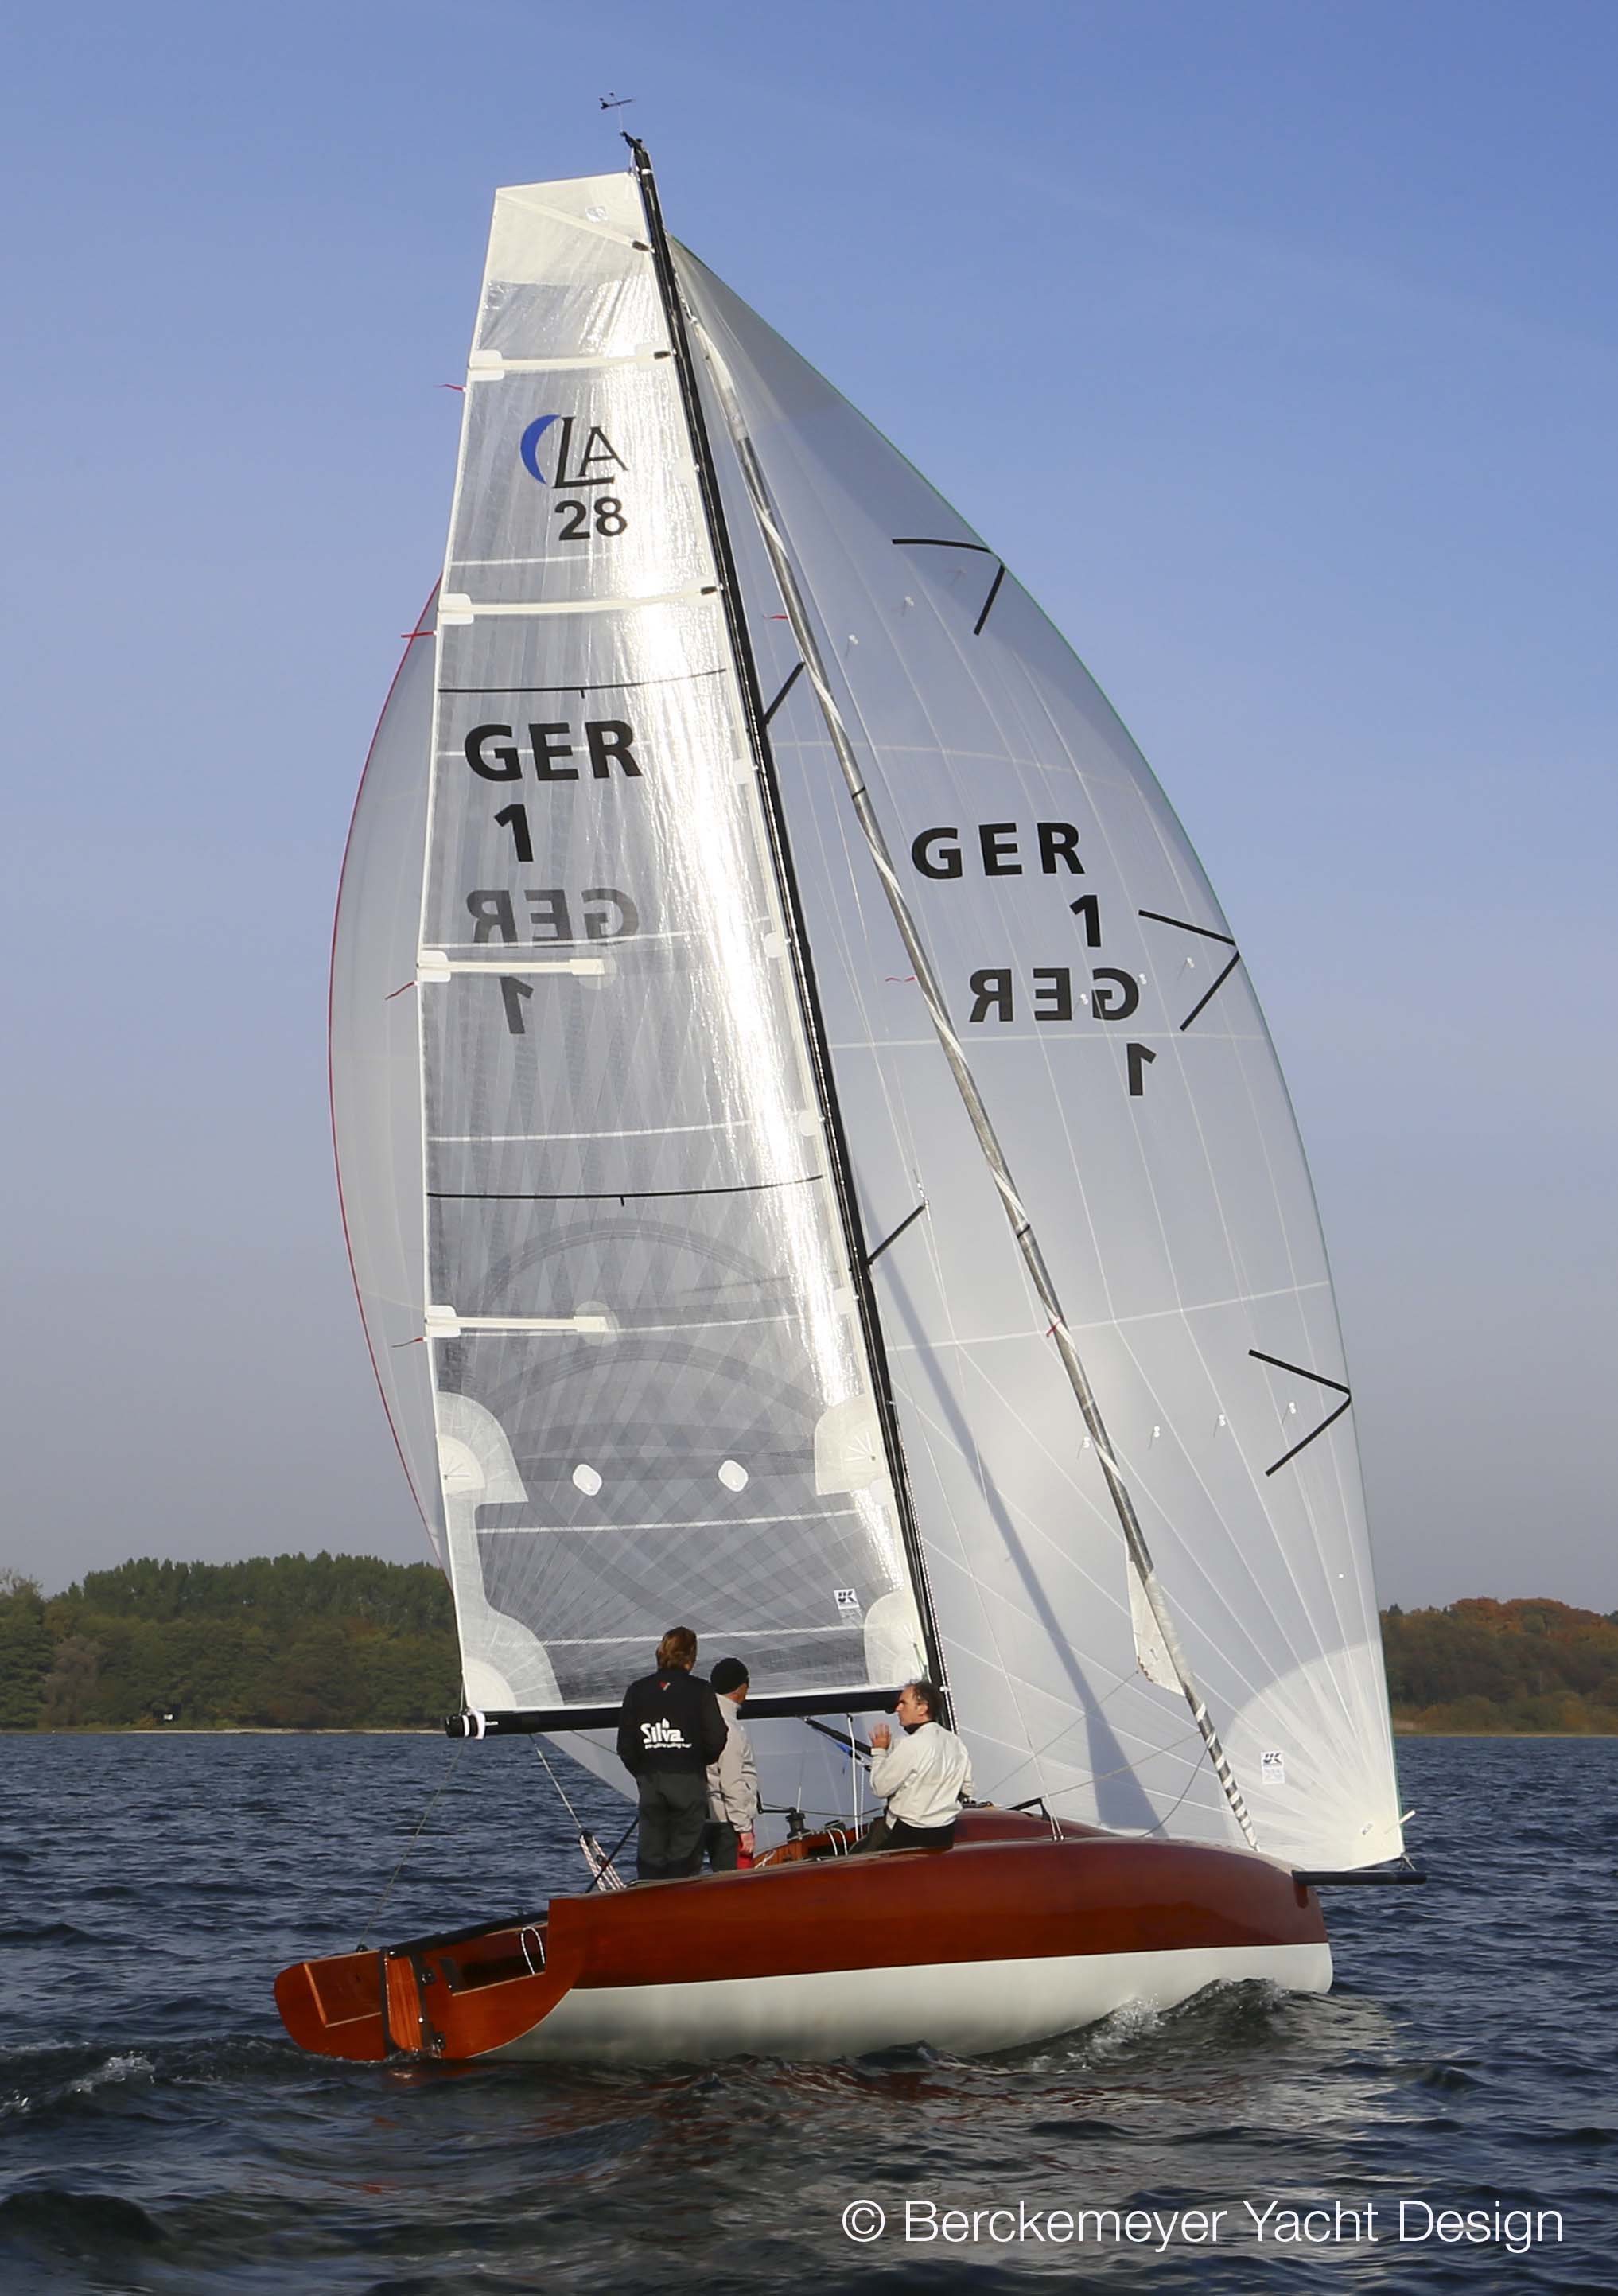 A Square-Top X-Drive mainsail on a 28-foot daysailer designed by Berkemeyer Yacht Design.